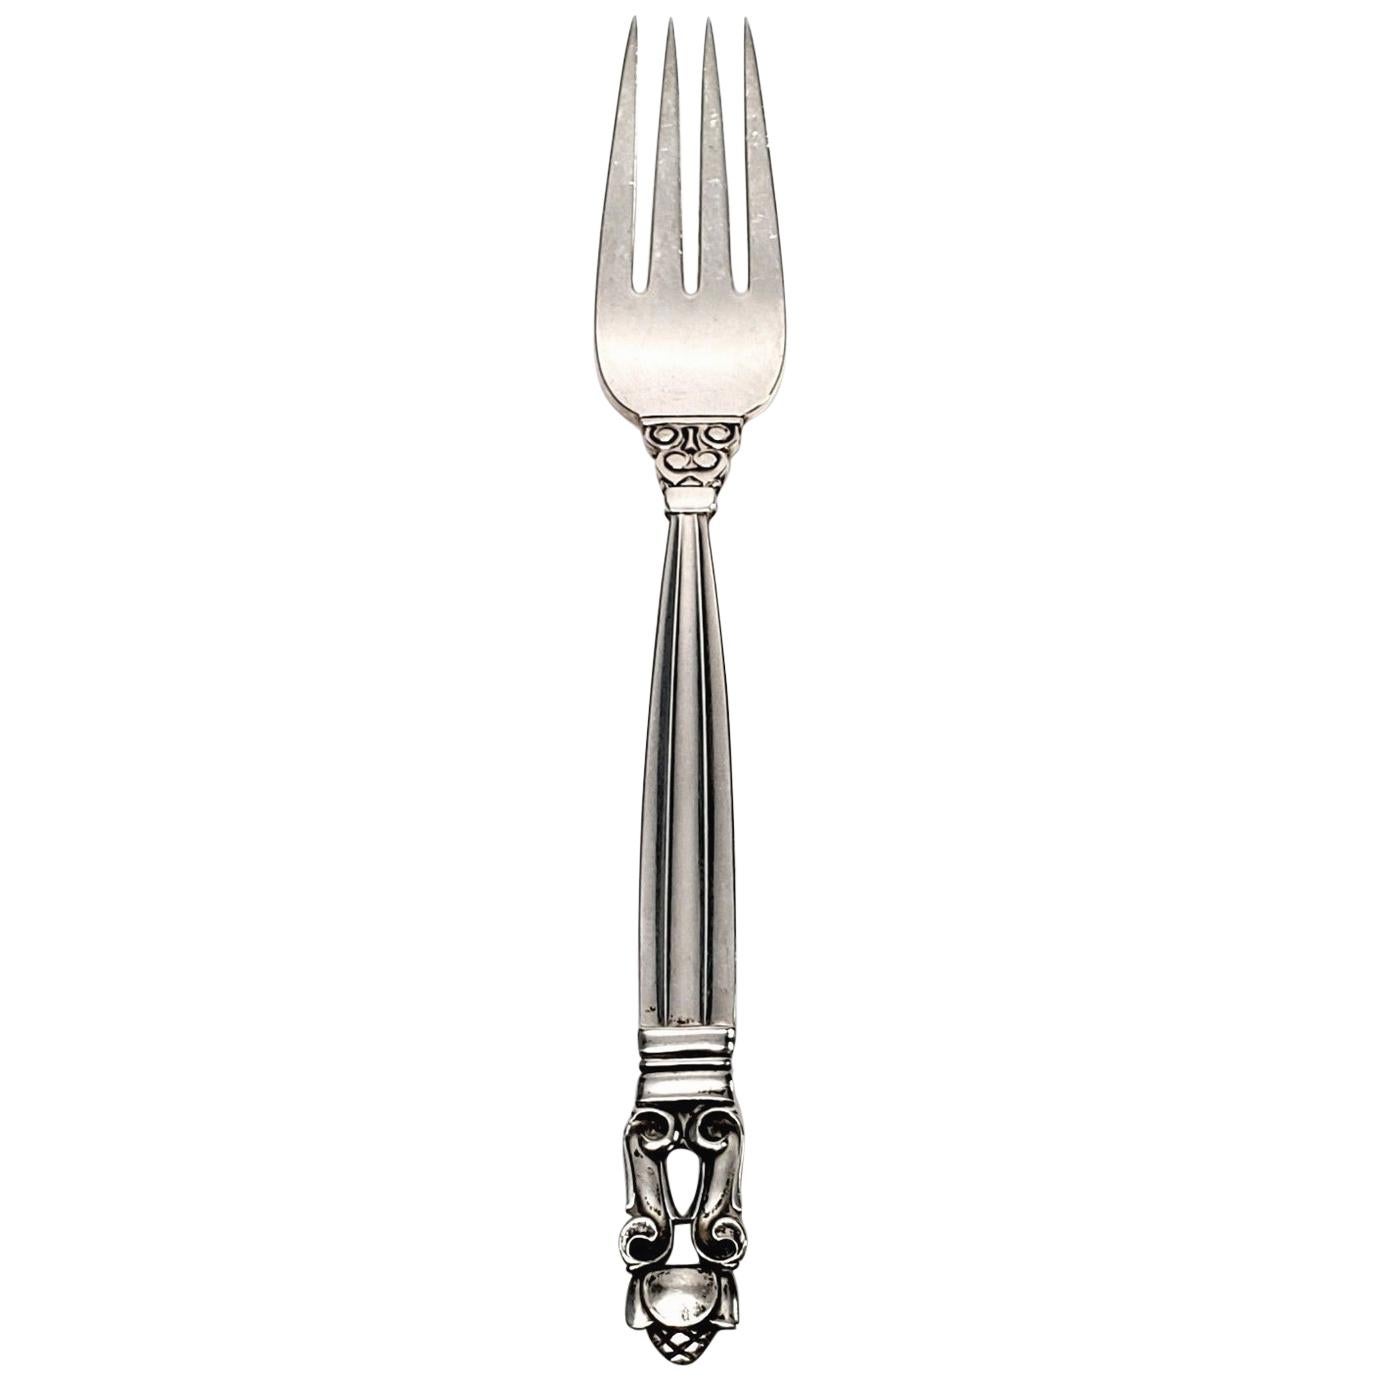 Georg Jensen Denmark Acorn Sterling Silver Youth Fork, with Engraving